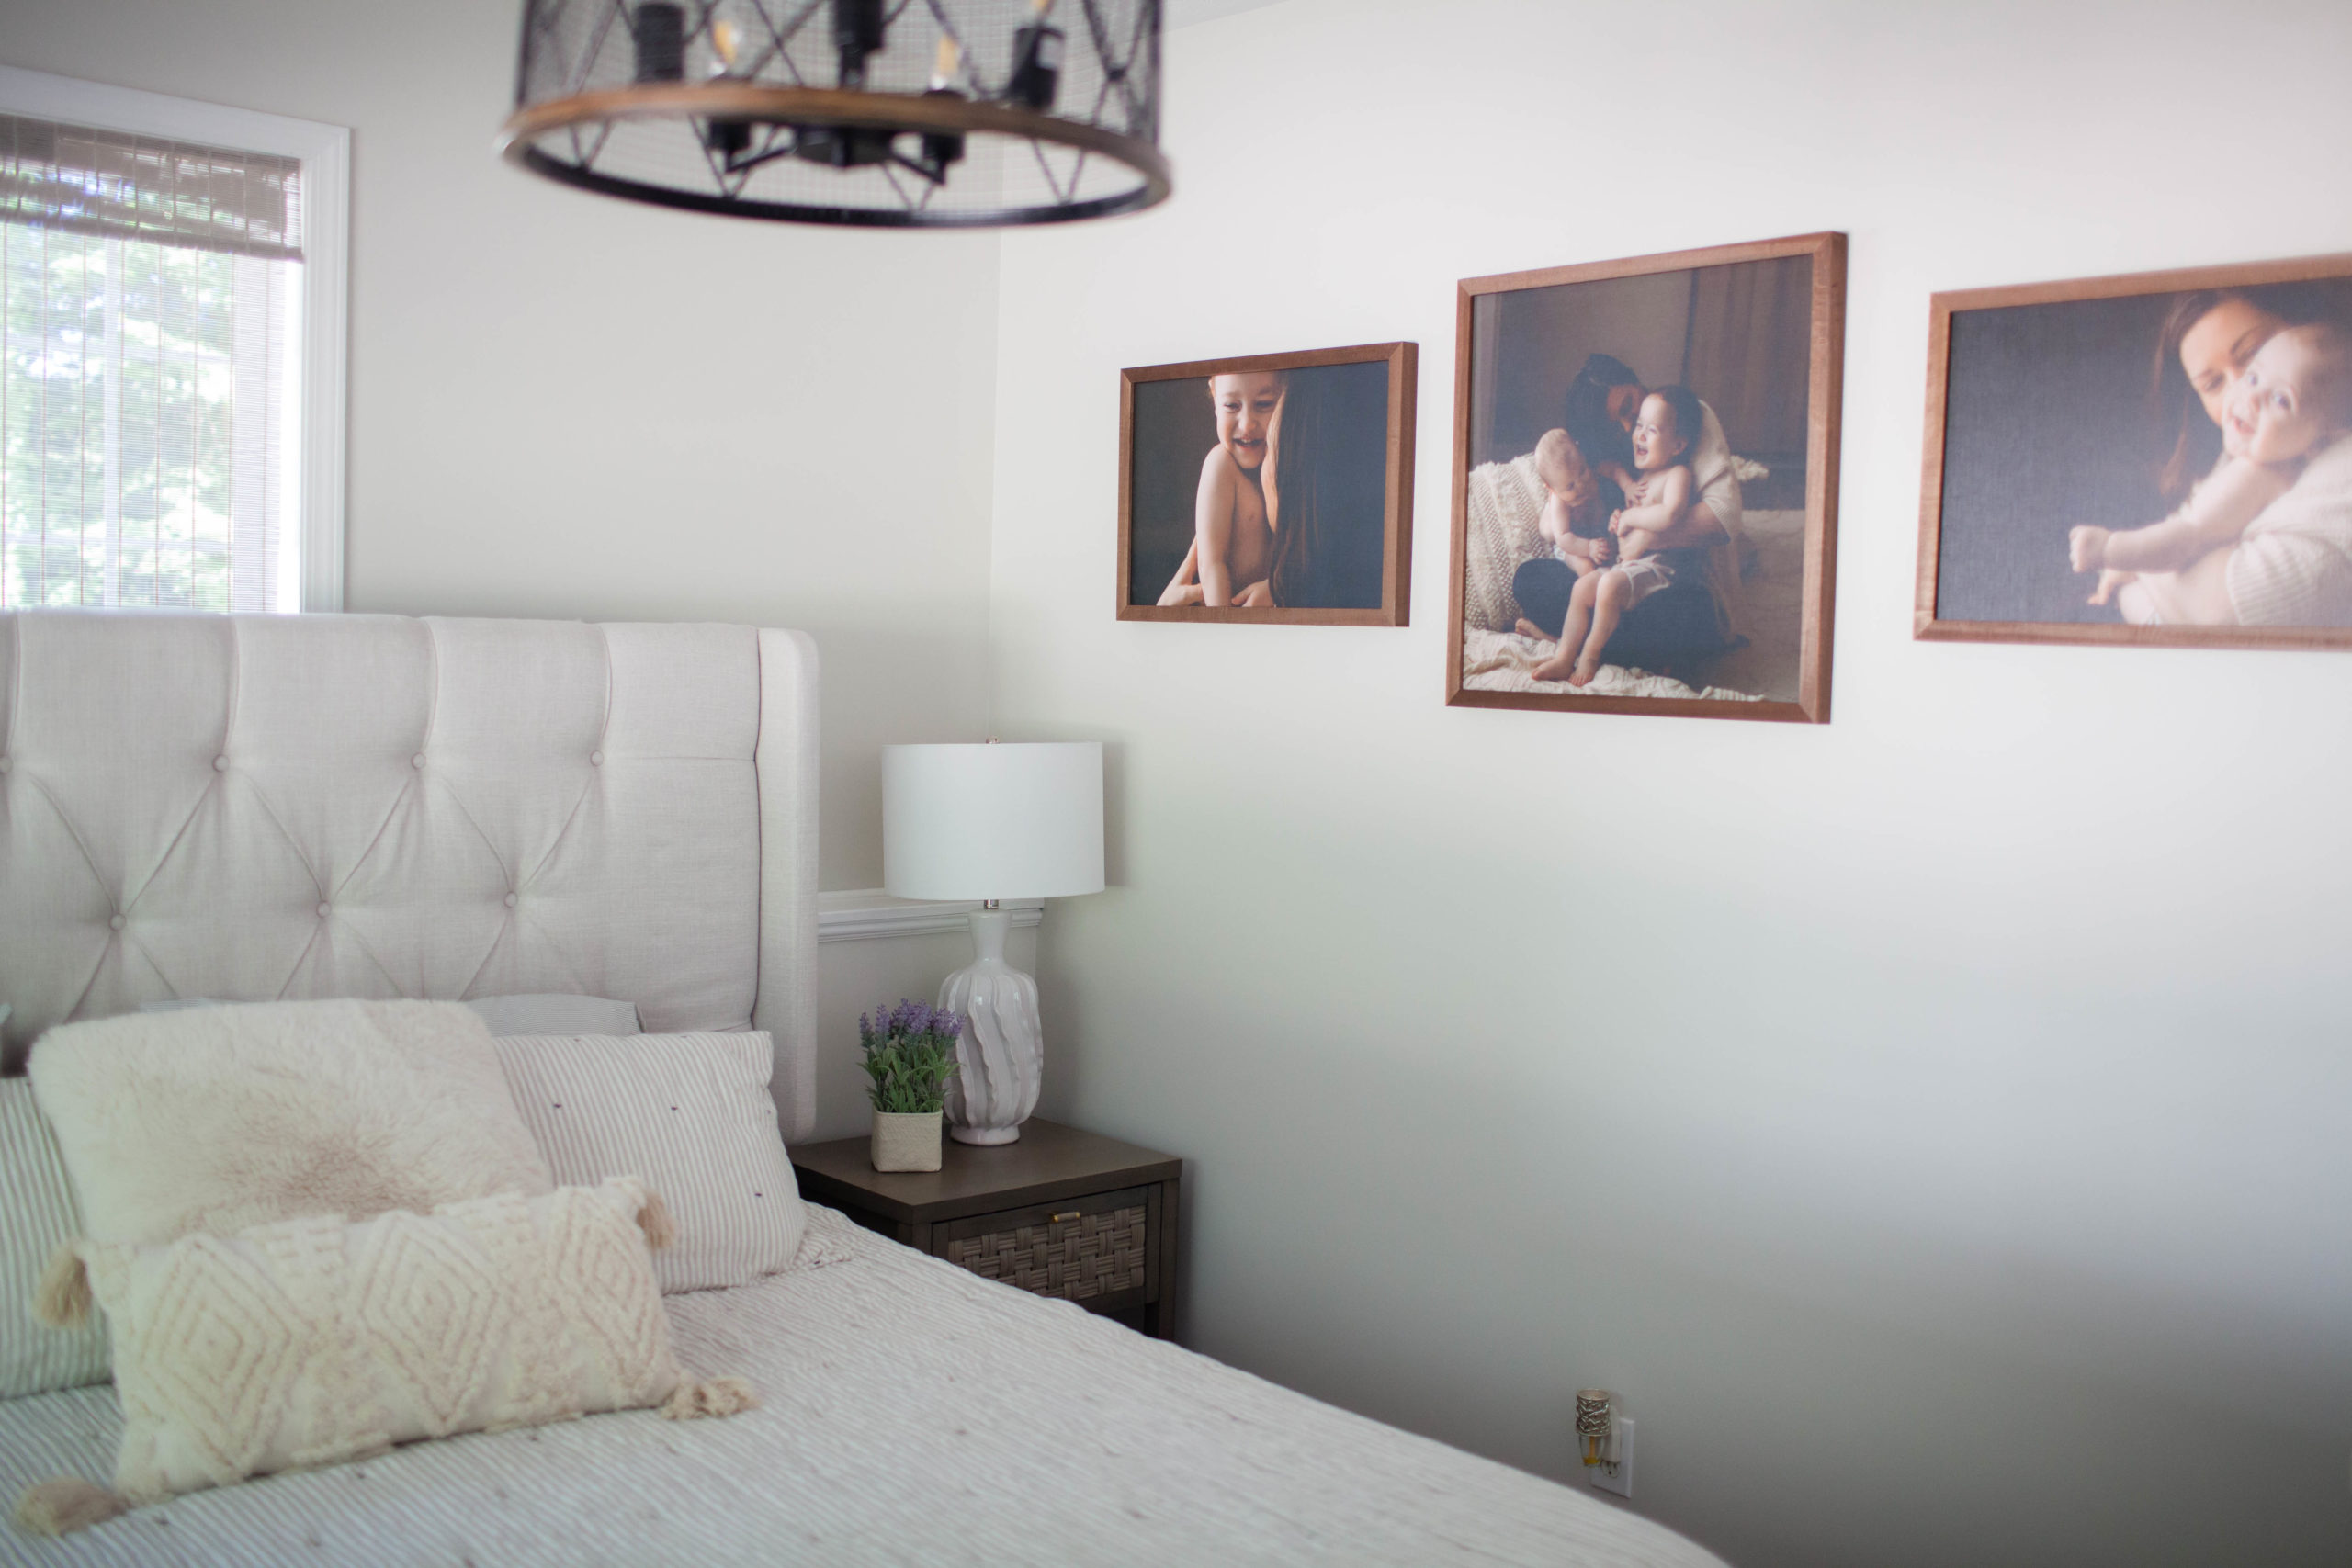 Sherwin Williams Aesthetic White in bedroom with neutral bed linens, home decor, gallery wall. Kylie M client photo